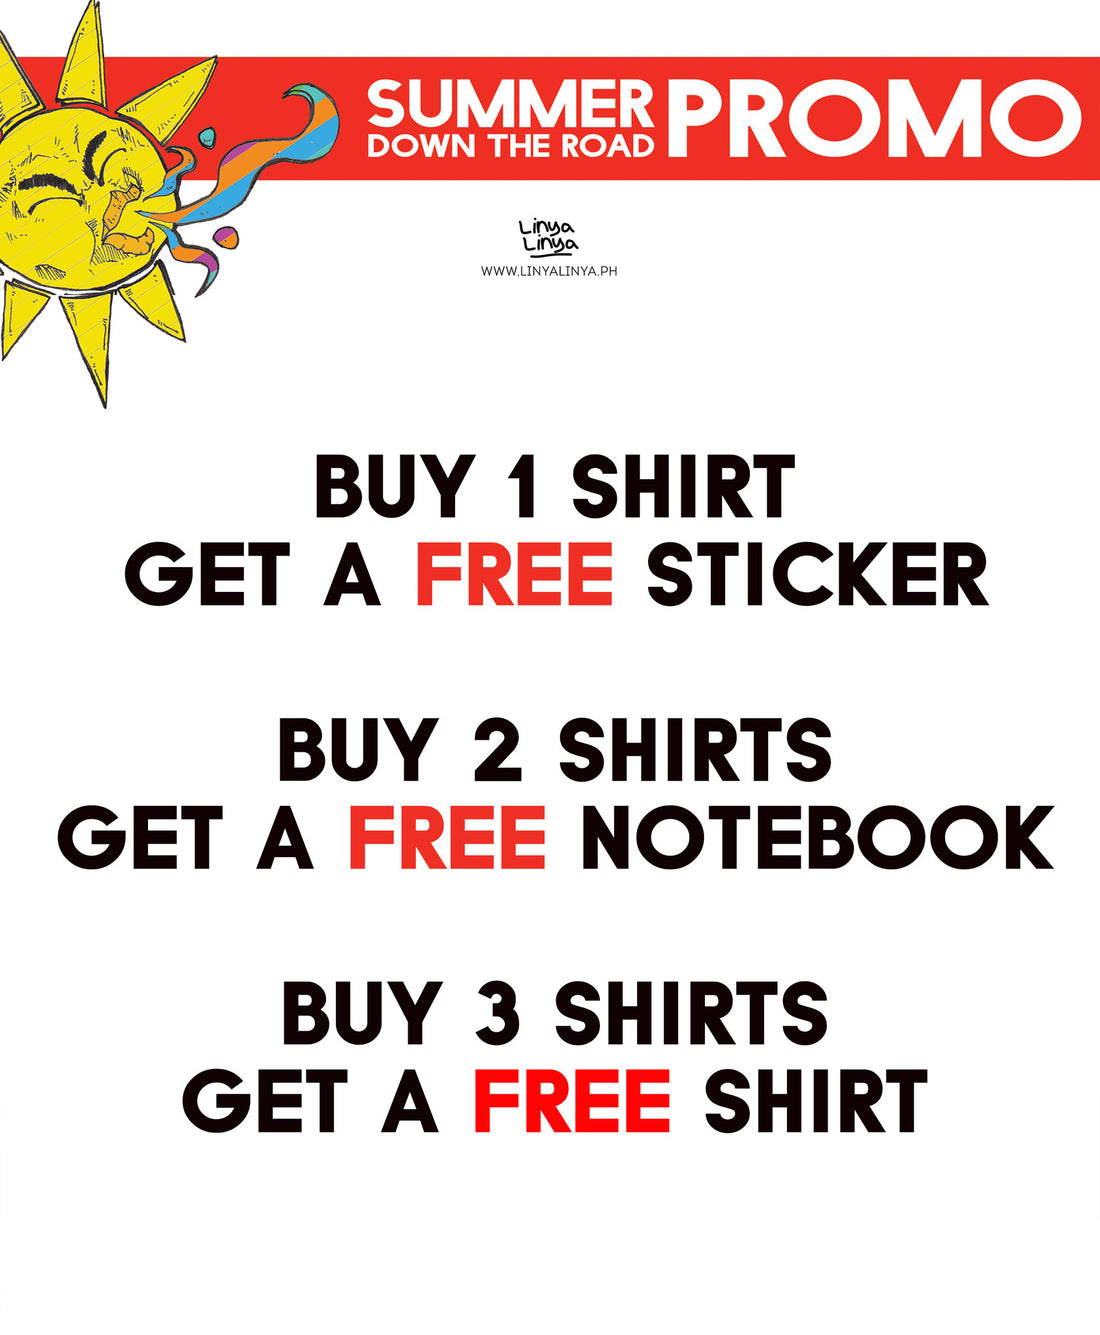 It’s summer time and we have a PROMO! #SummerDownTheRoad